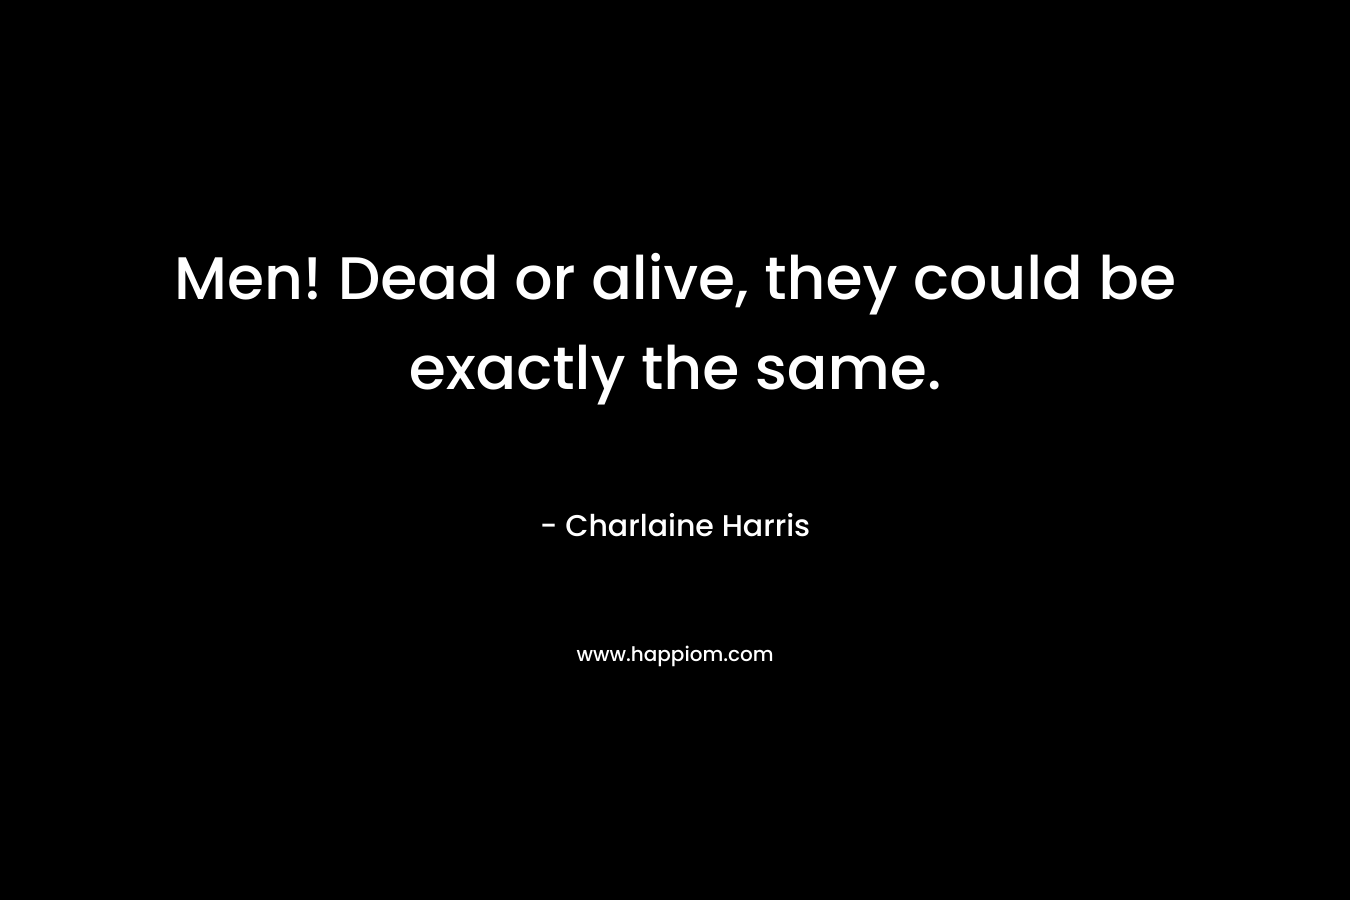 Men! Dead or alive, they could be exactly the same. – Charlaine Harris